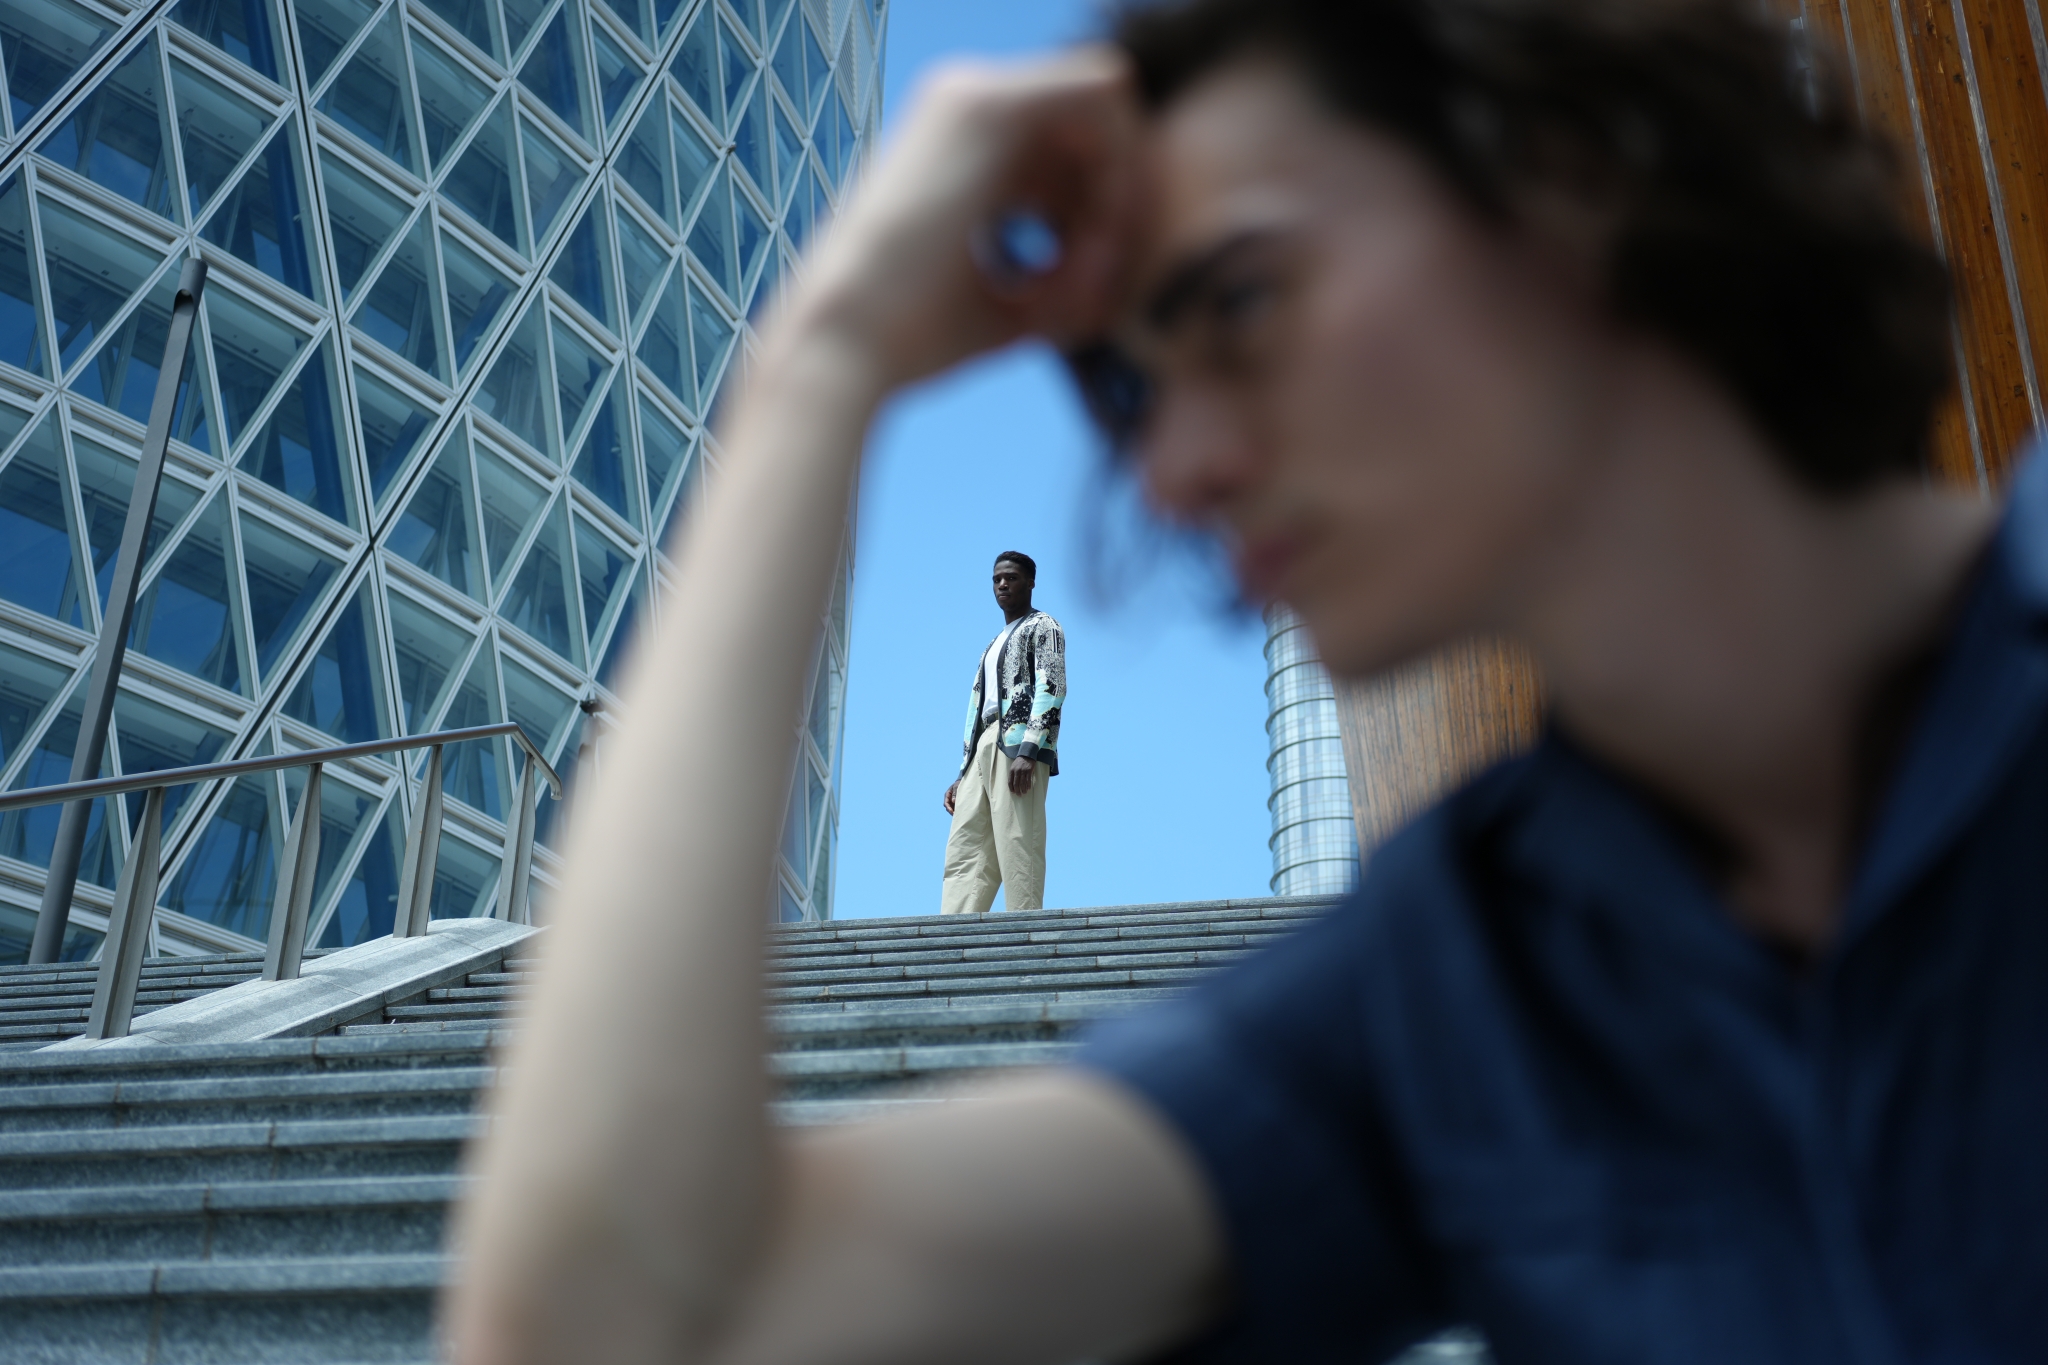 A male model stood at the top of stairs, framed by the arm of a male model in bokeh foreground